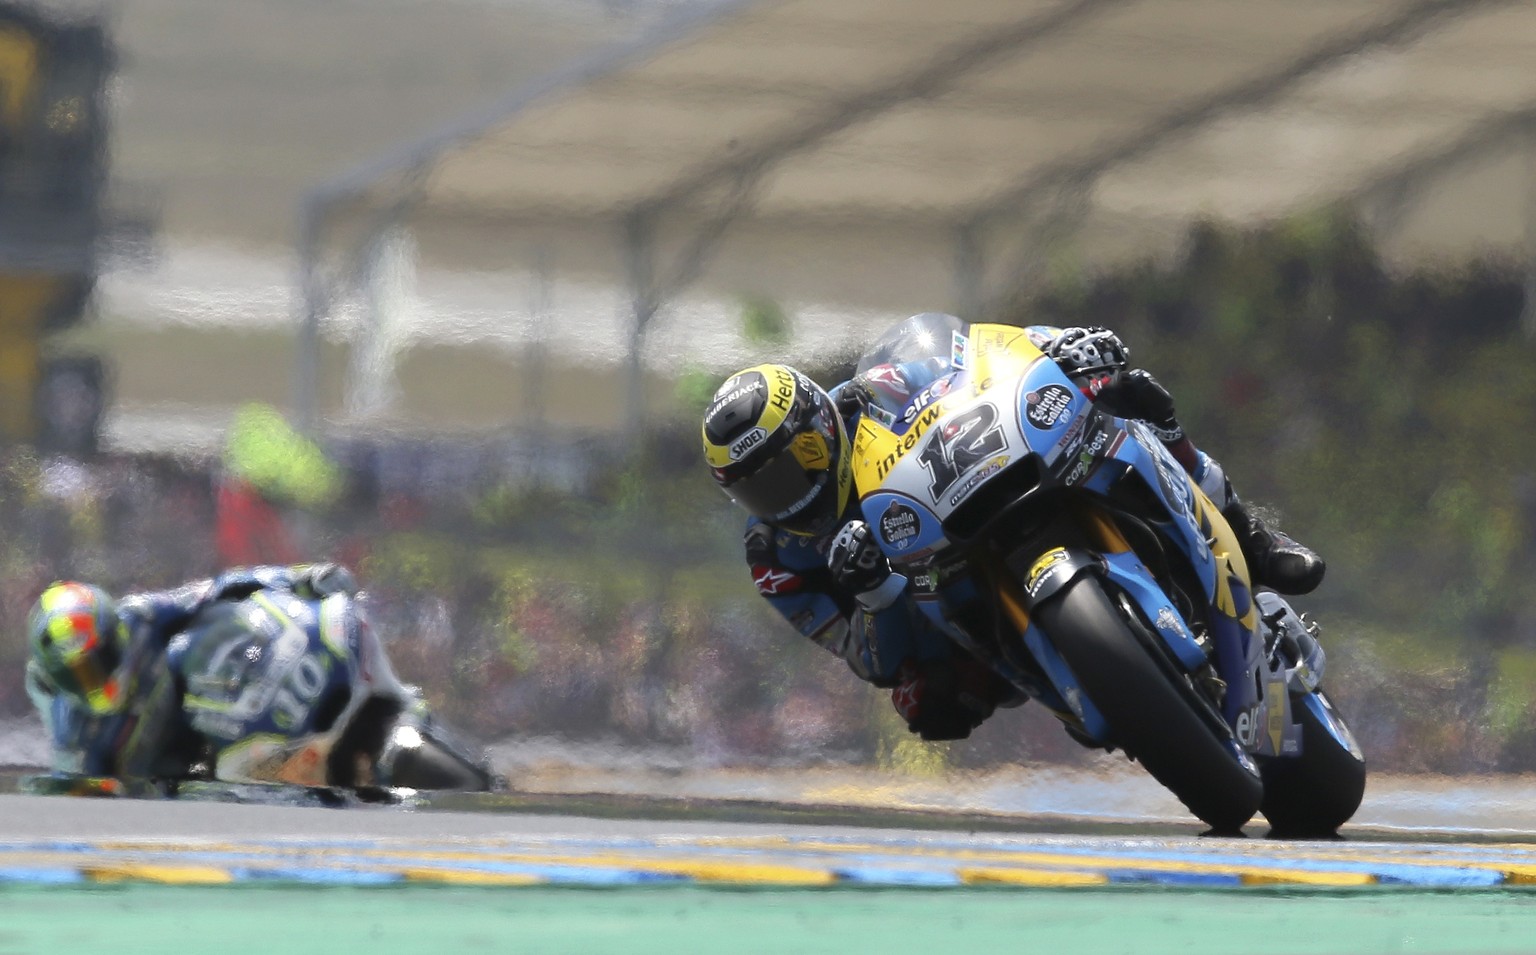 Moto GP rider Thomas Luthi of Switzerland takes a curve during the French Motorcycle Grand Prix race in Le Mans, France, Sunday, May 20, 2018. (AP Photo/David Vincent)